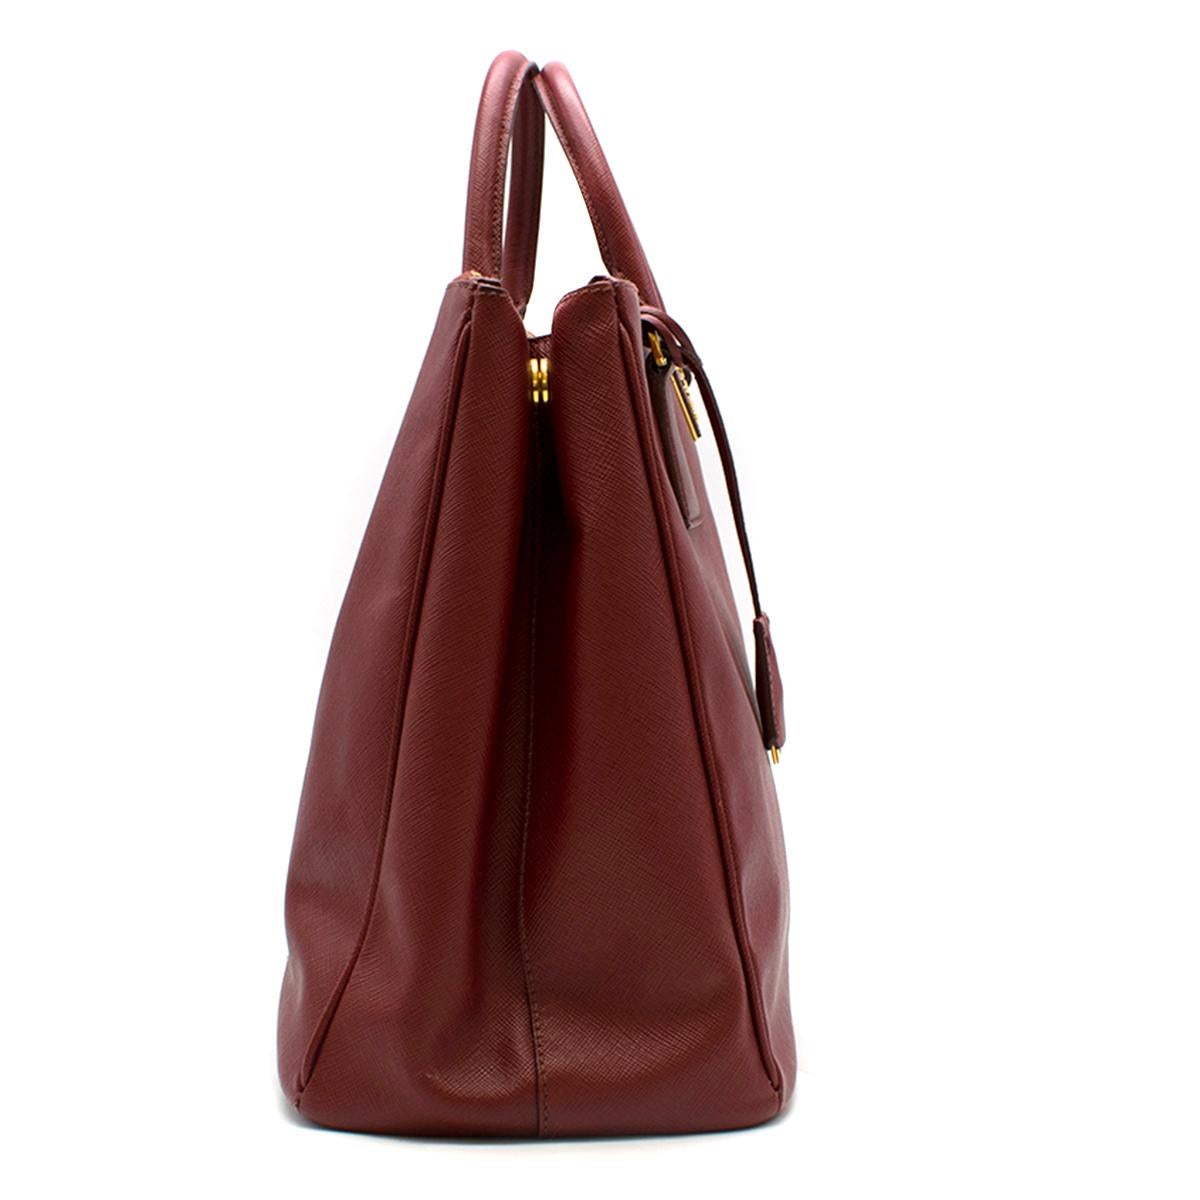 Prada Red Leather Galleria Saffiano Top-handle Bag 

- Red, leather top-handle bag
- Gold tone hardware
- Double zip fastening closure
- Interior zip pocket
- Two interior compartments
- Tubular handles
- Signature logo at the front
- Square